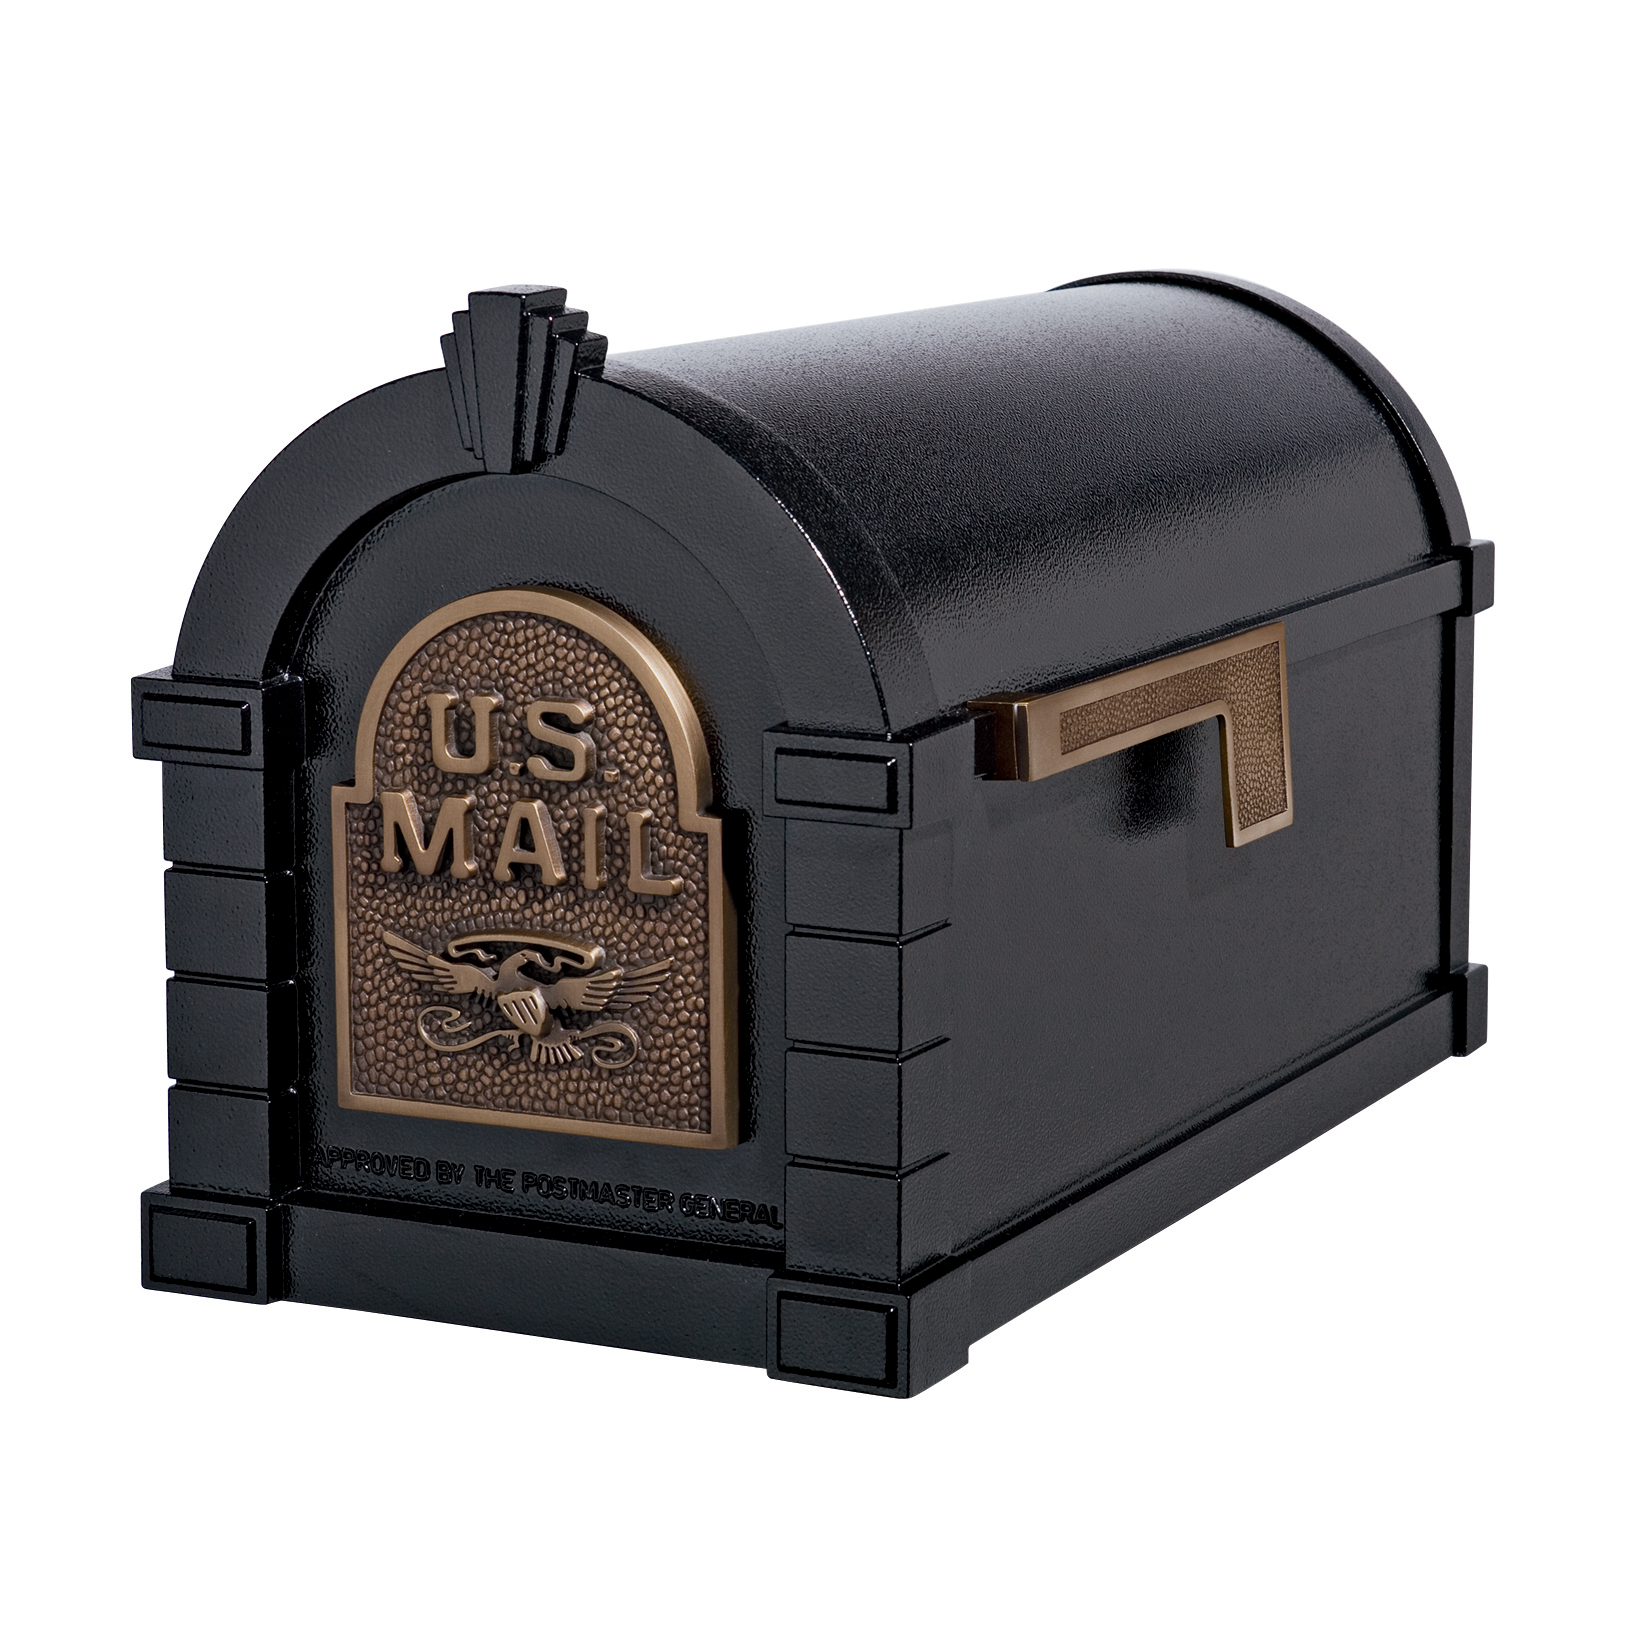 Gaines Eagle Keystone MailboxesBlack with Antique Bronze